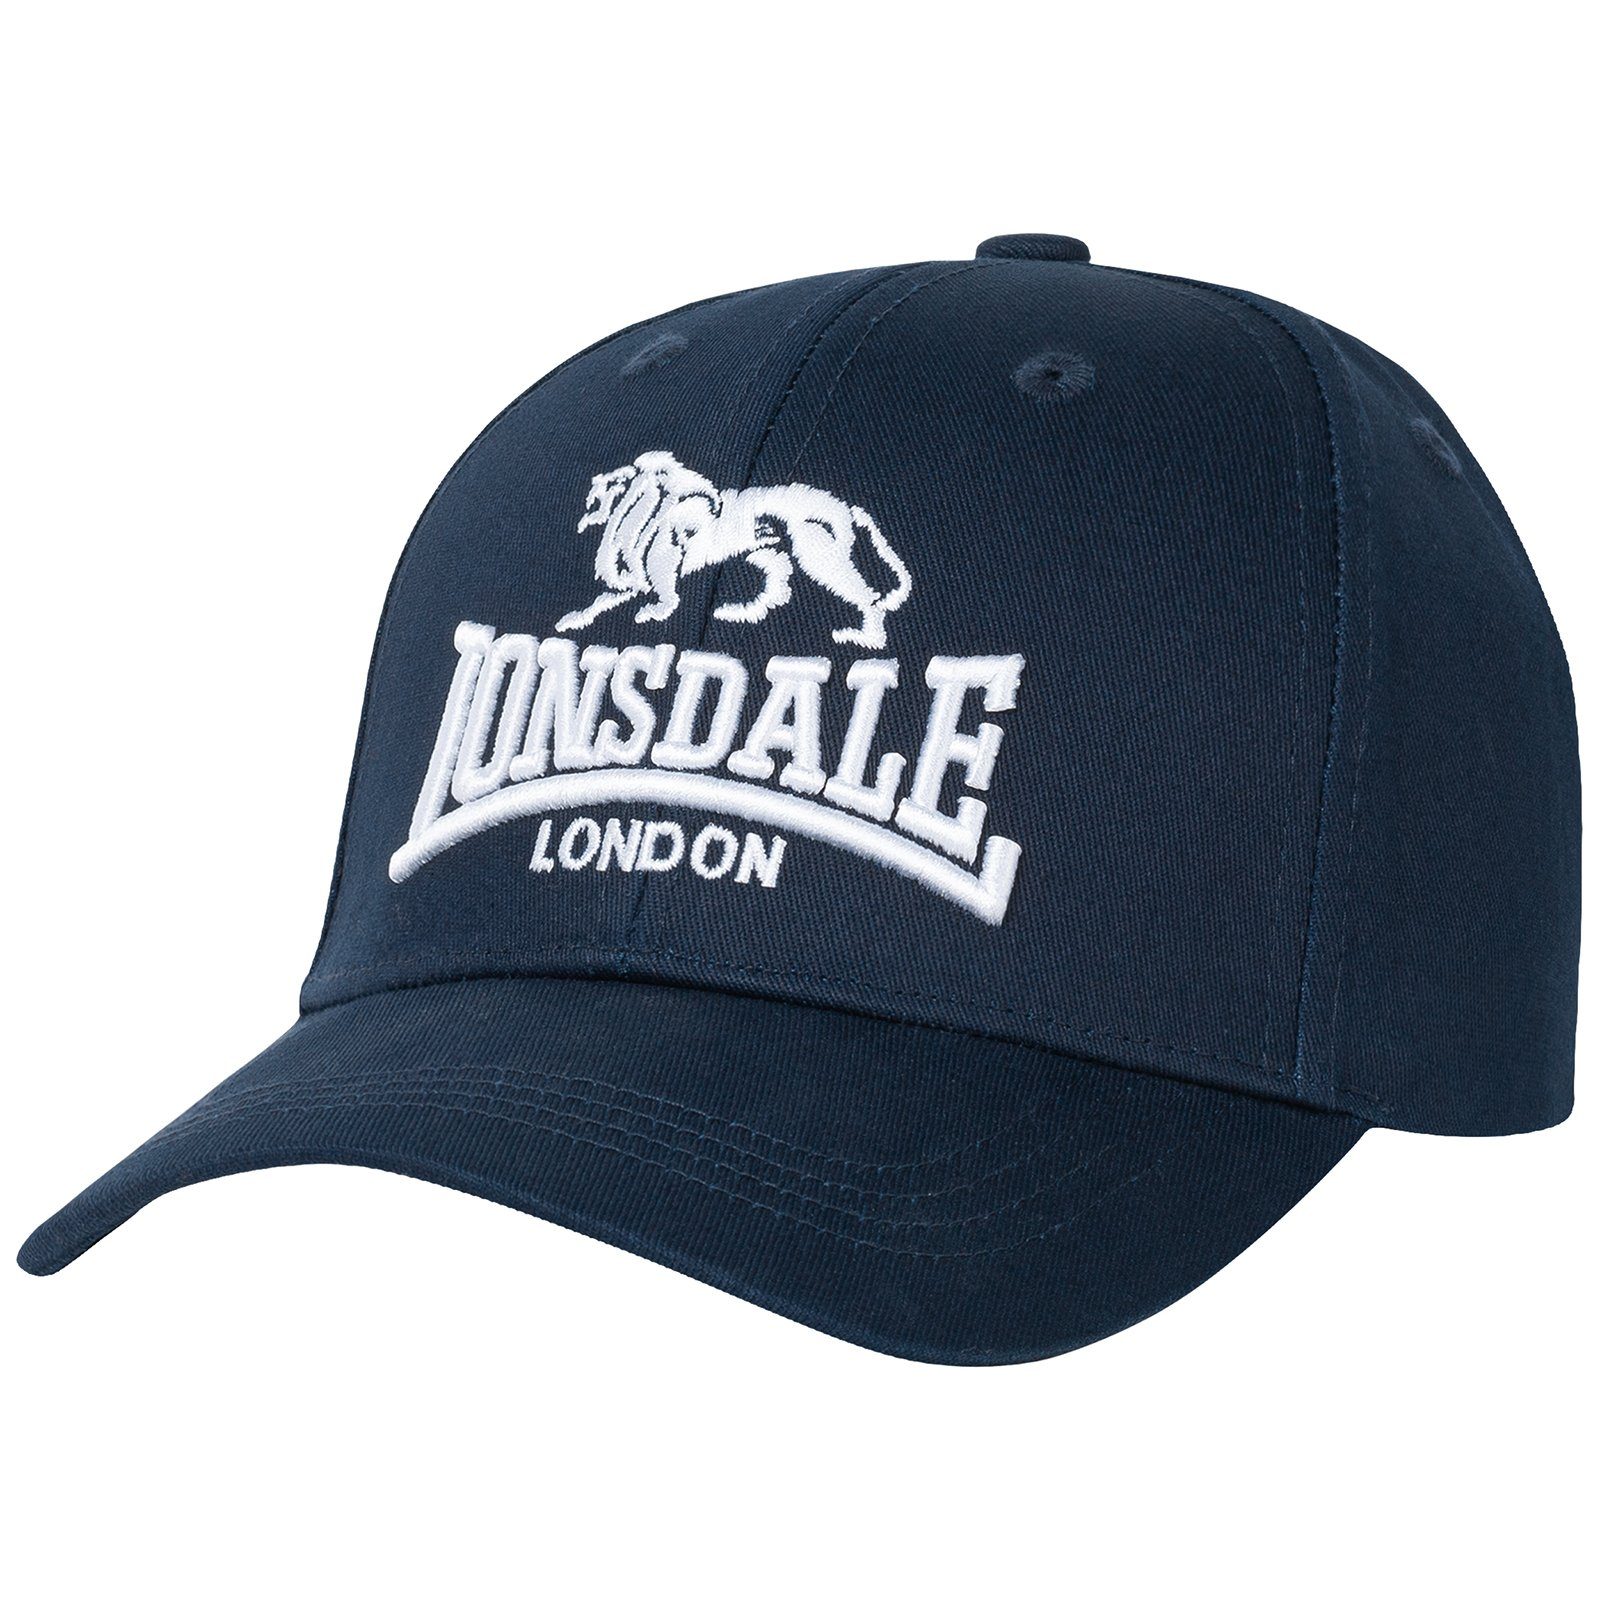 Baseball WILTSHIRE Cap Lonsdale